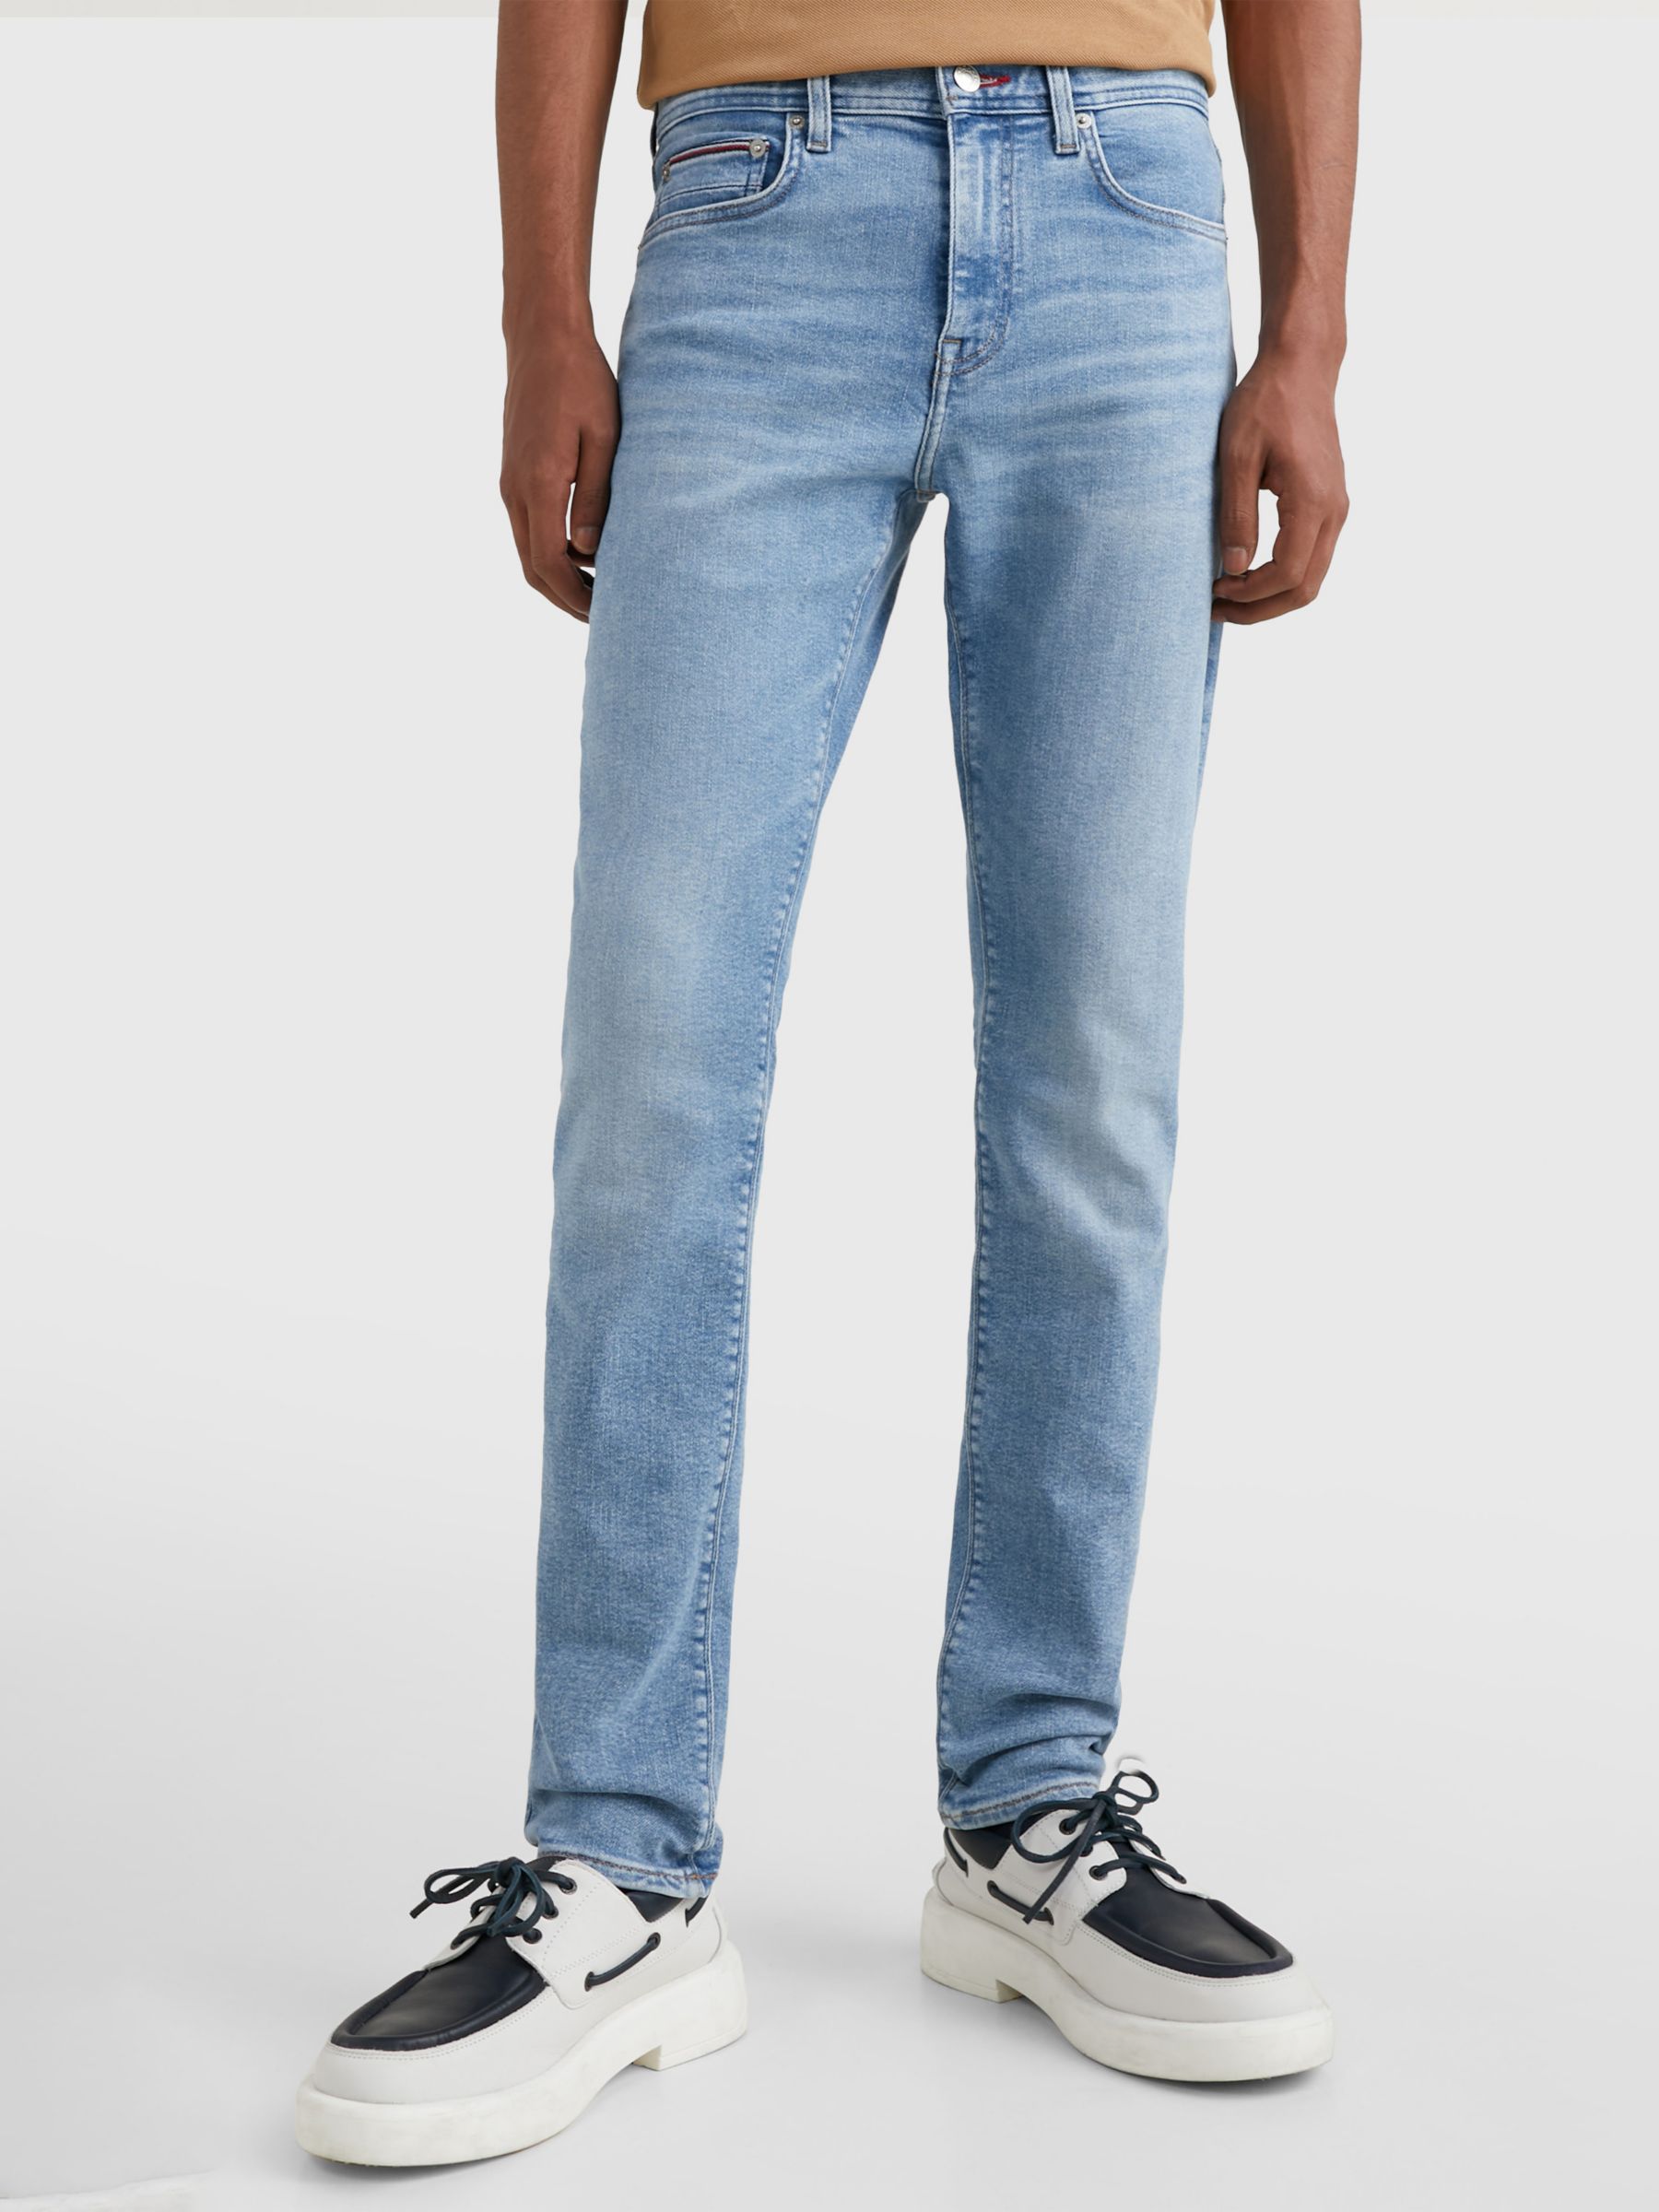 Tommy Hilfiger Extra Slim Layton Jeans, Blue at Lewis & Partners